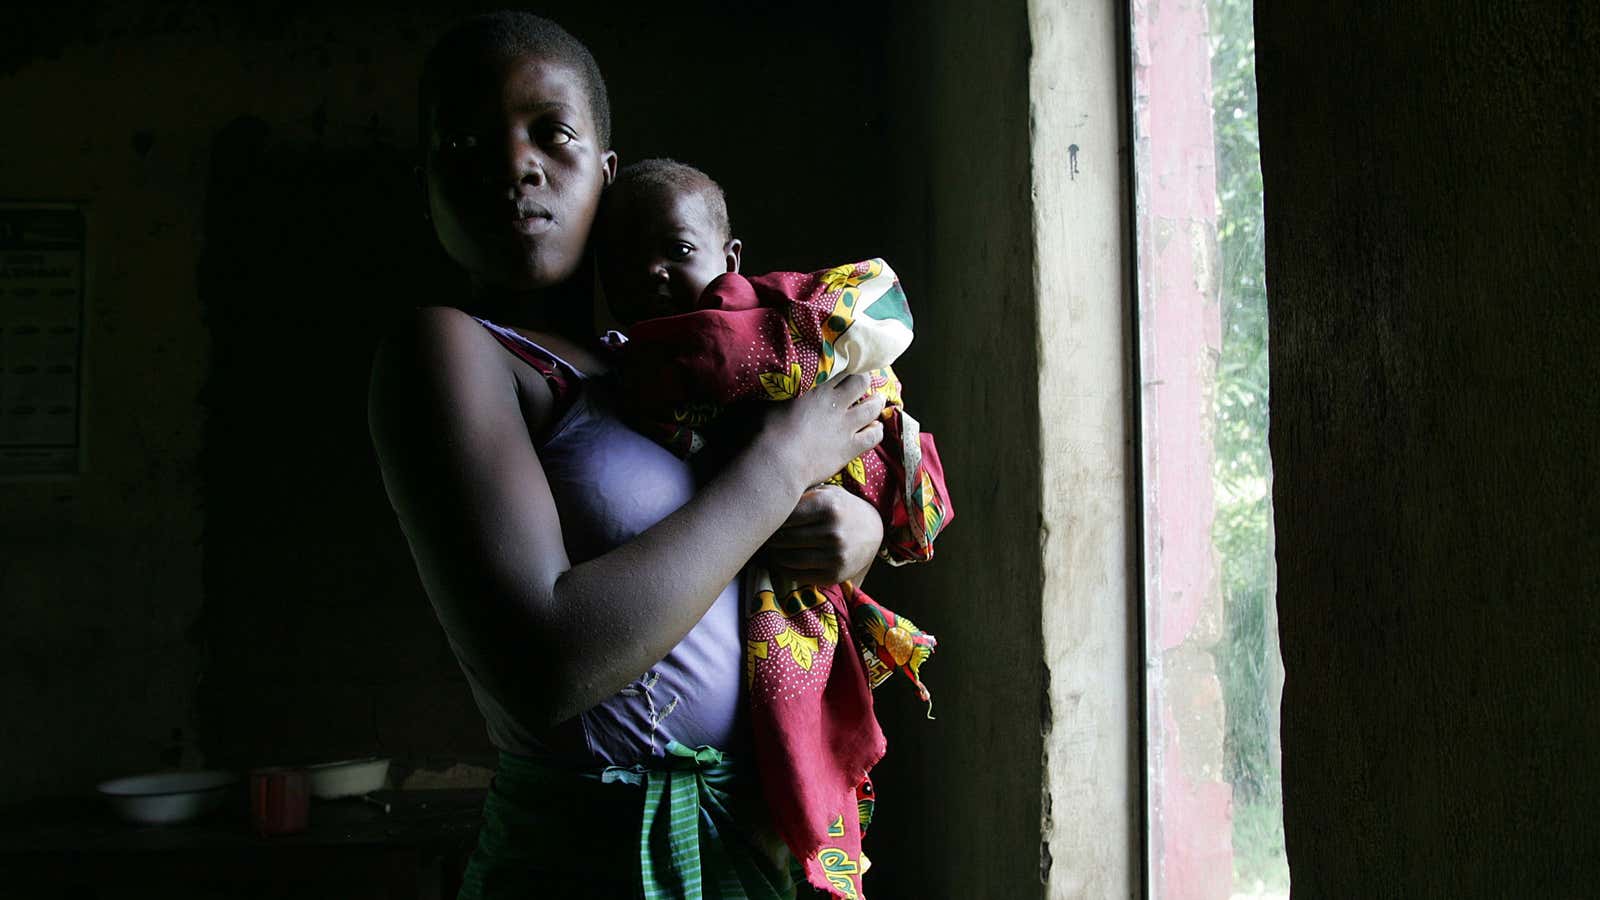 Child marriage is still common in Malawi.